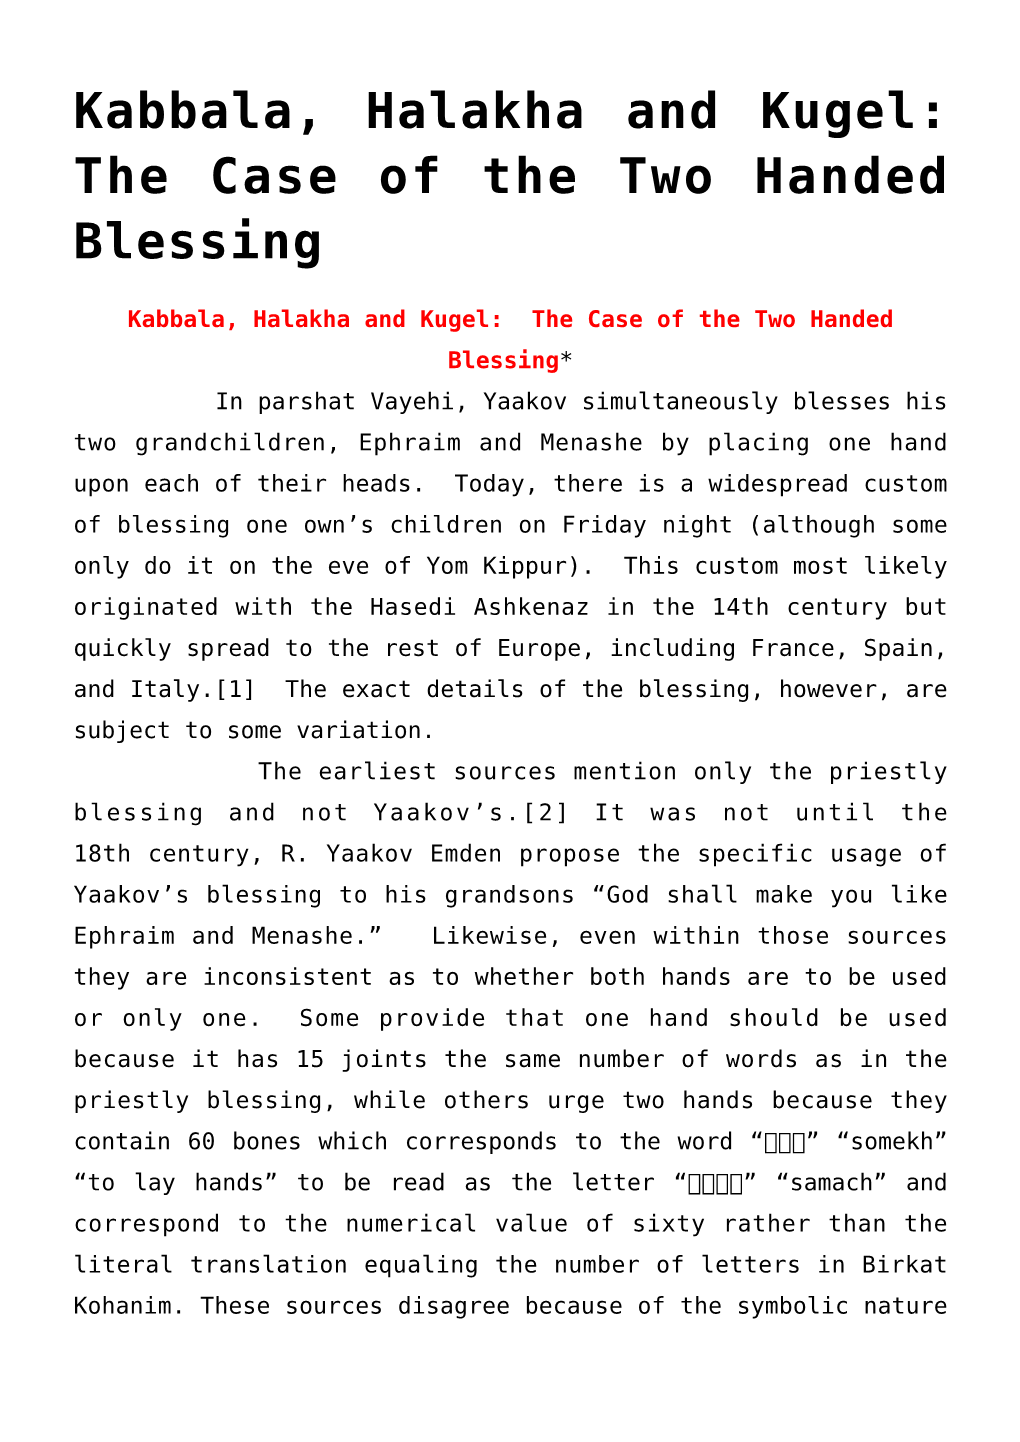 Kabbala, Halakha and Kugel: the Case of the Two Handed Blessing